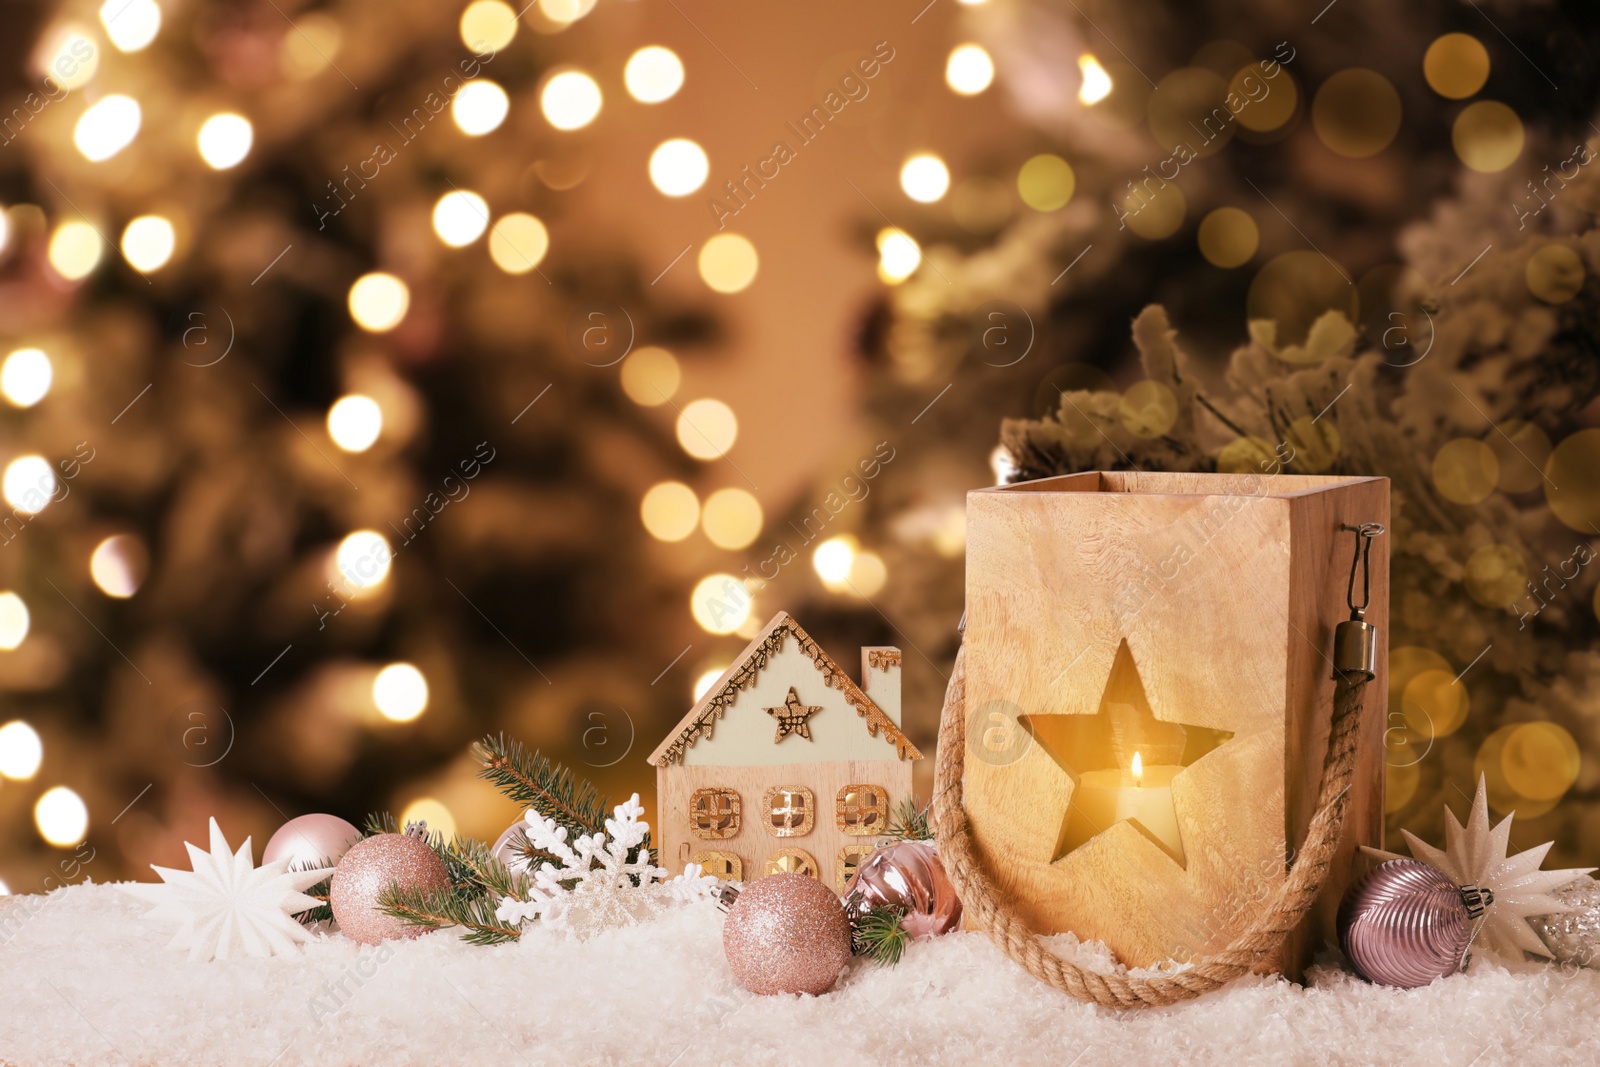 Image of Composition with wooden Christmas lantern on table. Bokeh effect